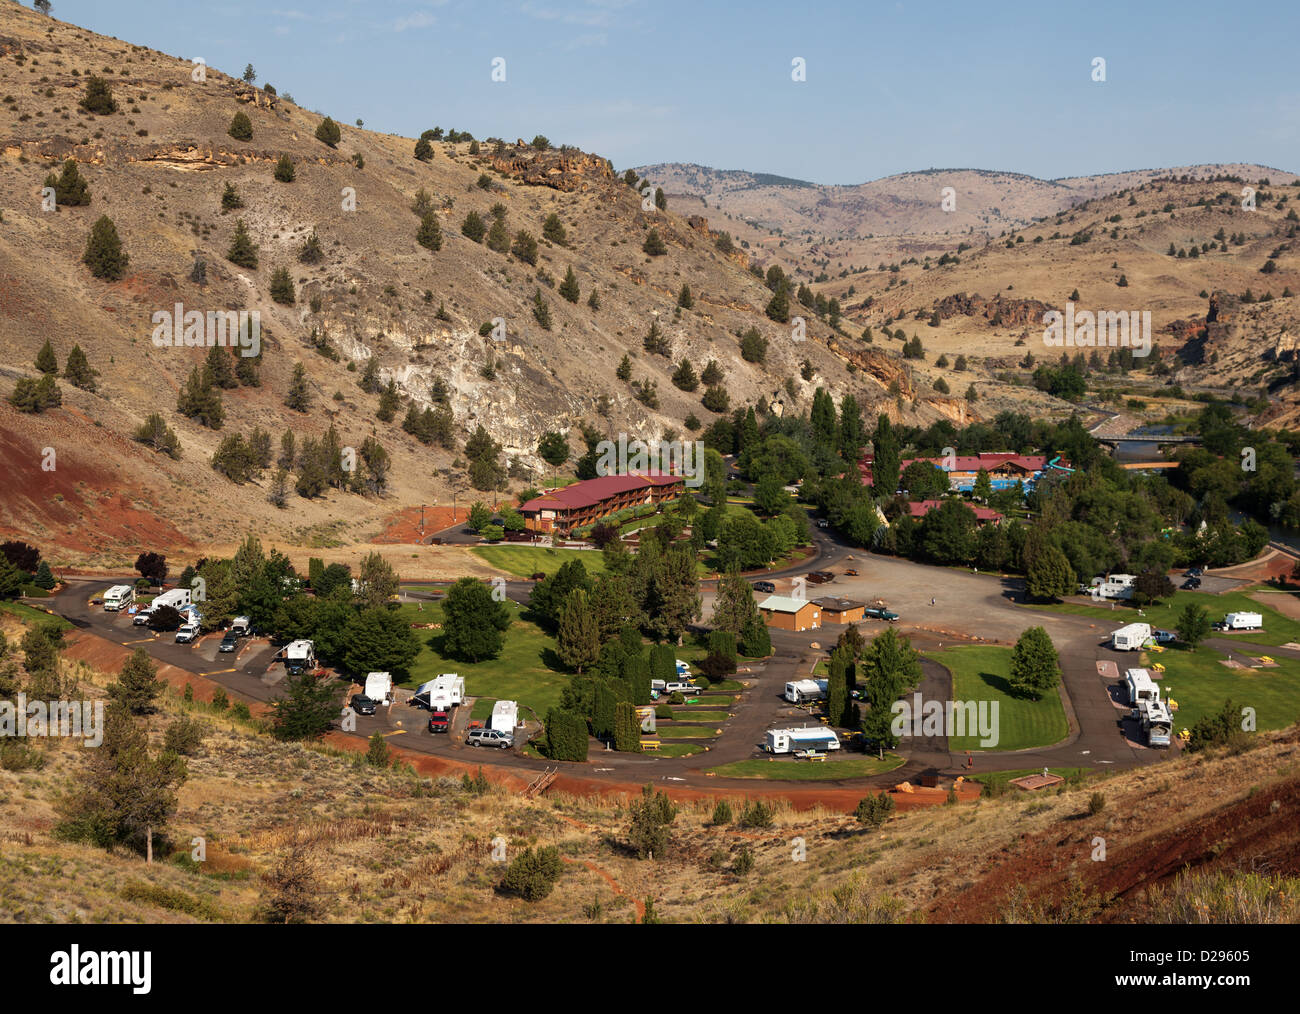 View of RV campground at Kah-Nee-Ta Resort, near Warm Springs, Oregon, USA Stock Photo